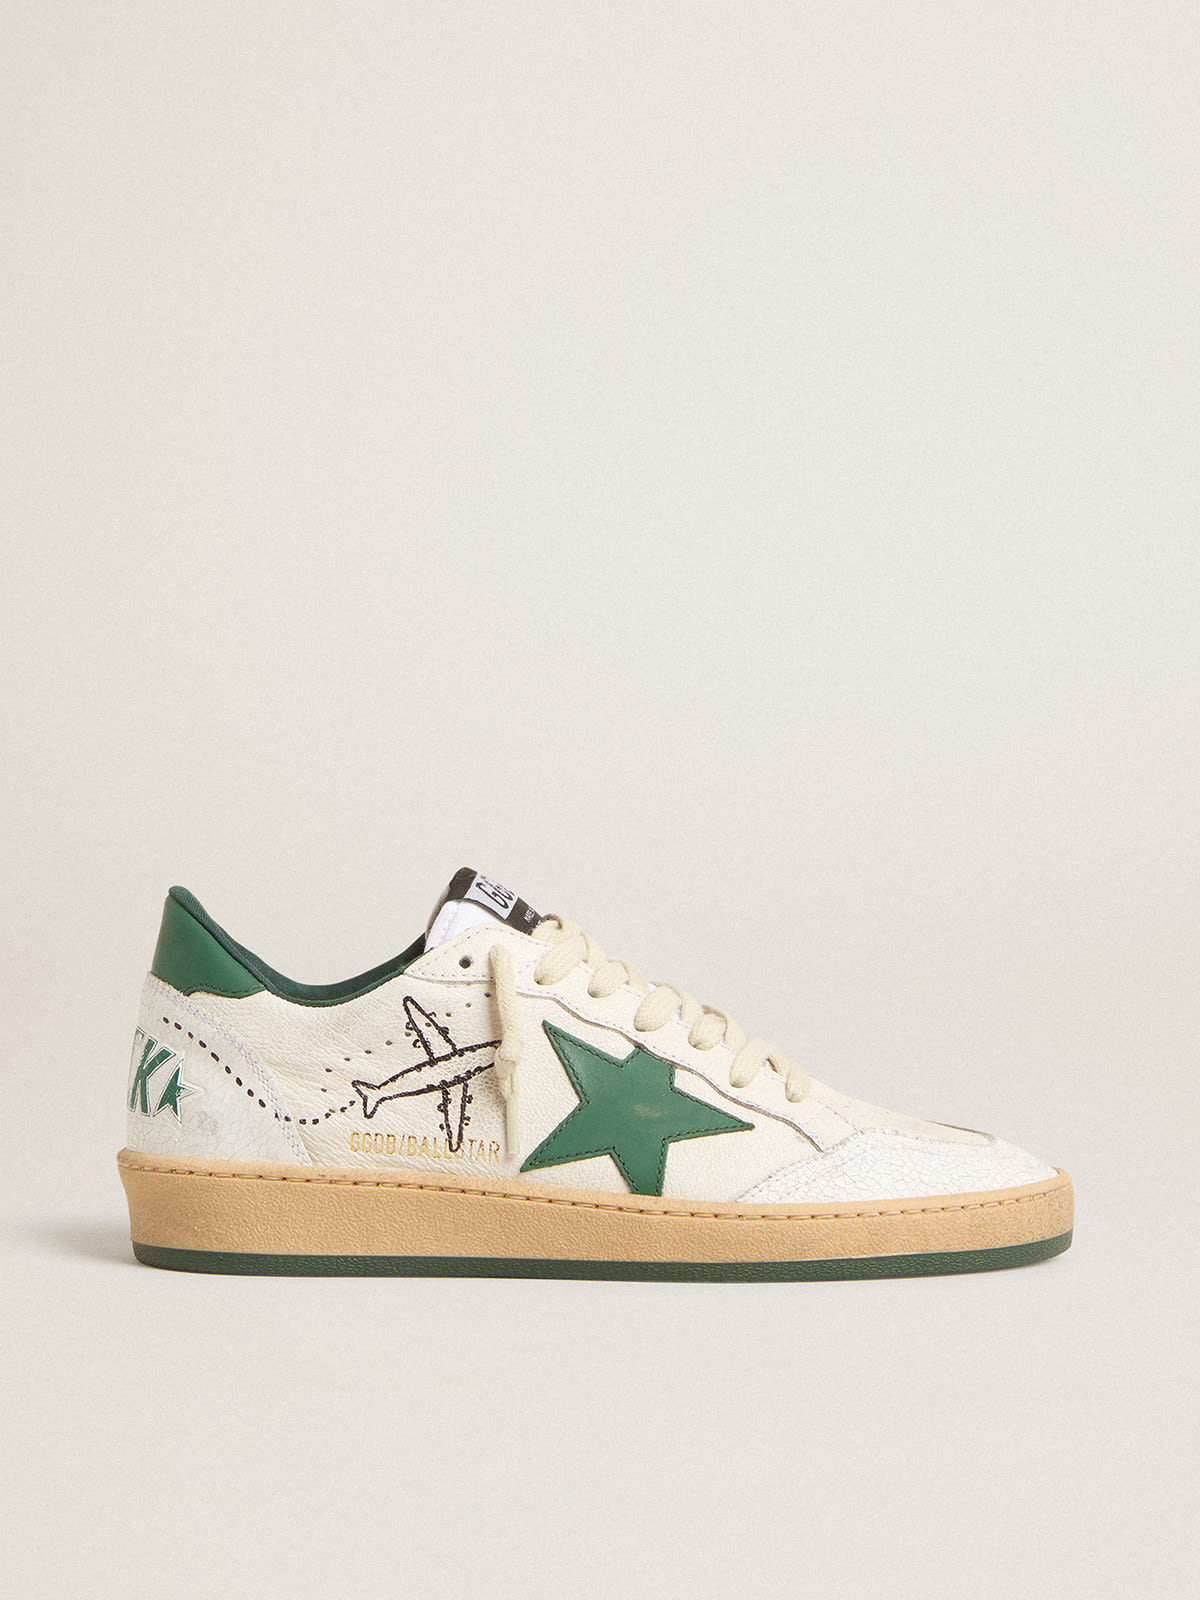 Golden Goose - Women's Ball Star Wishes in white nappa leather with green leather star and heel tab in 